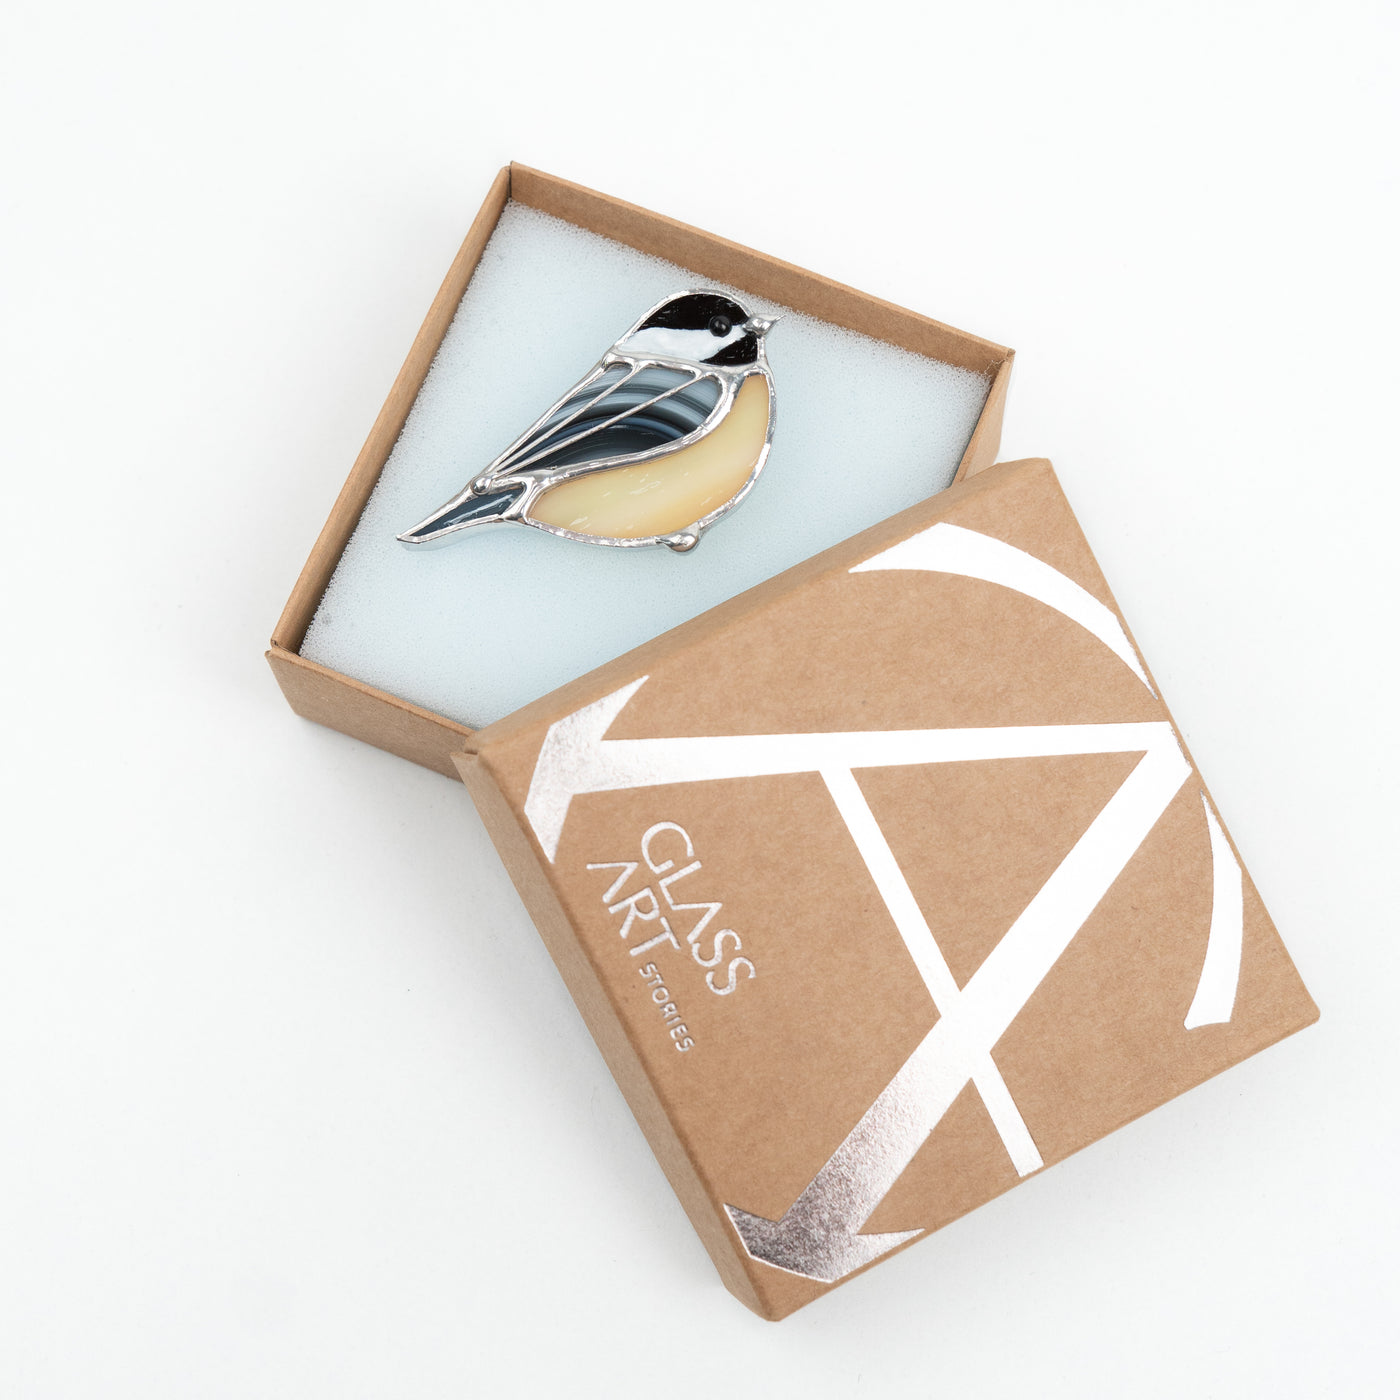 Stained glass yellow chickadee pin in a brand box